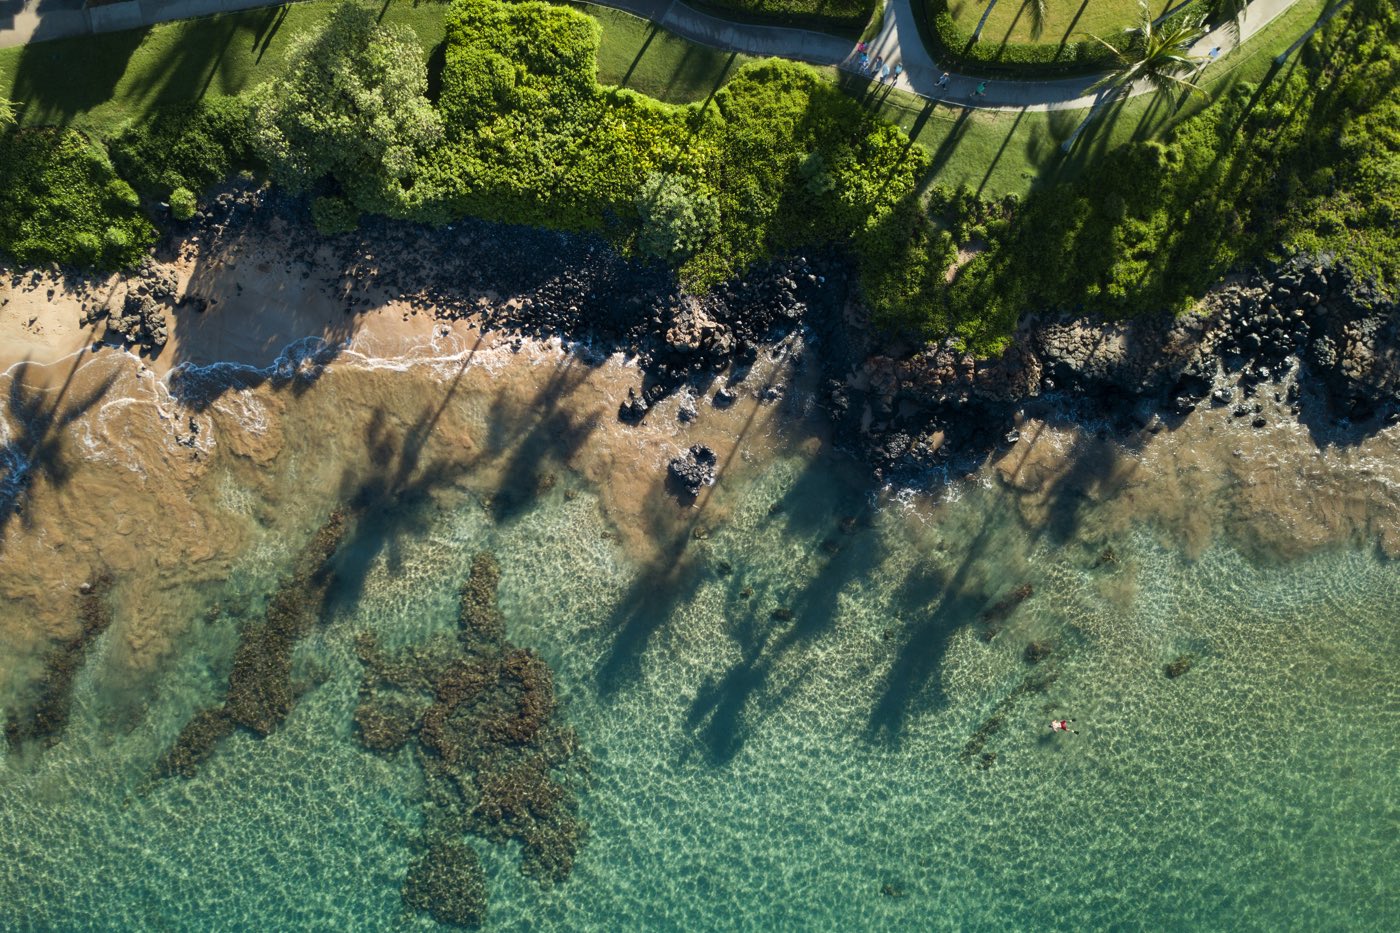 Wondering Where To Stay in Maui? 25 Great Spots You’ll Love